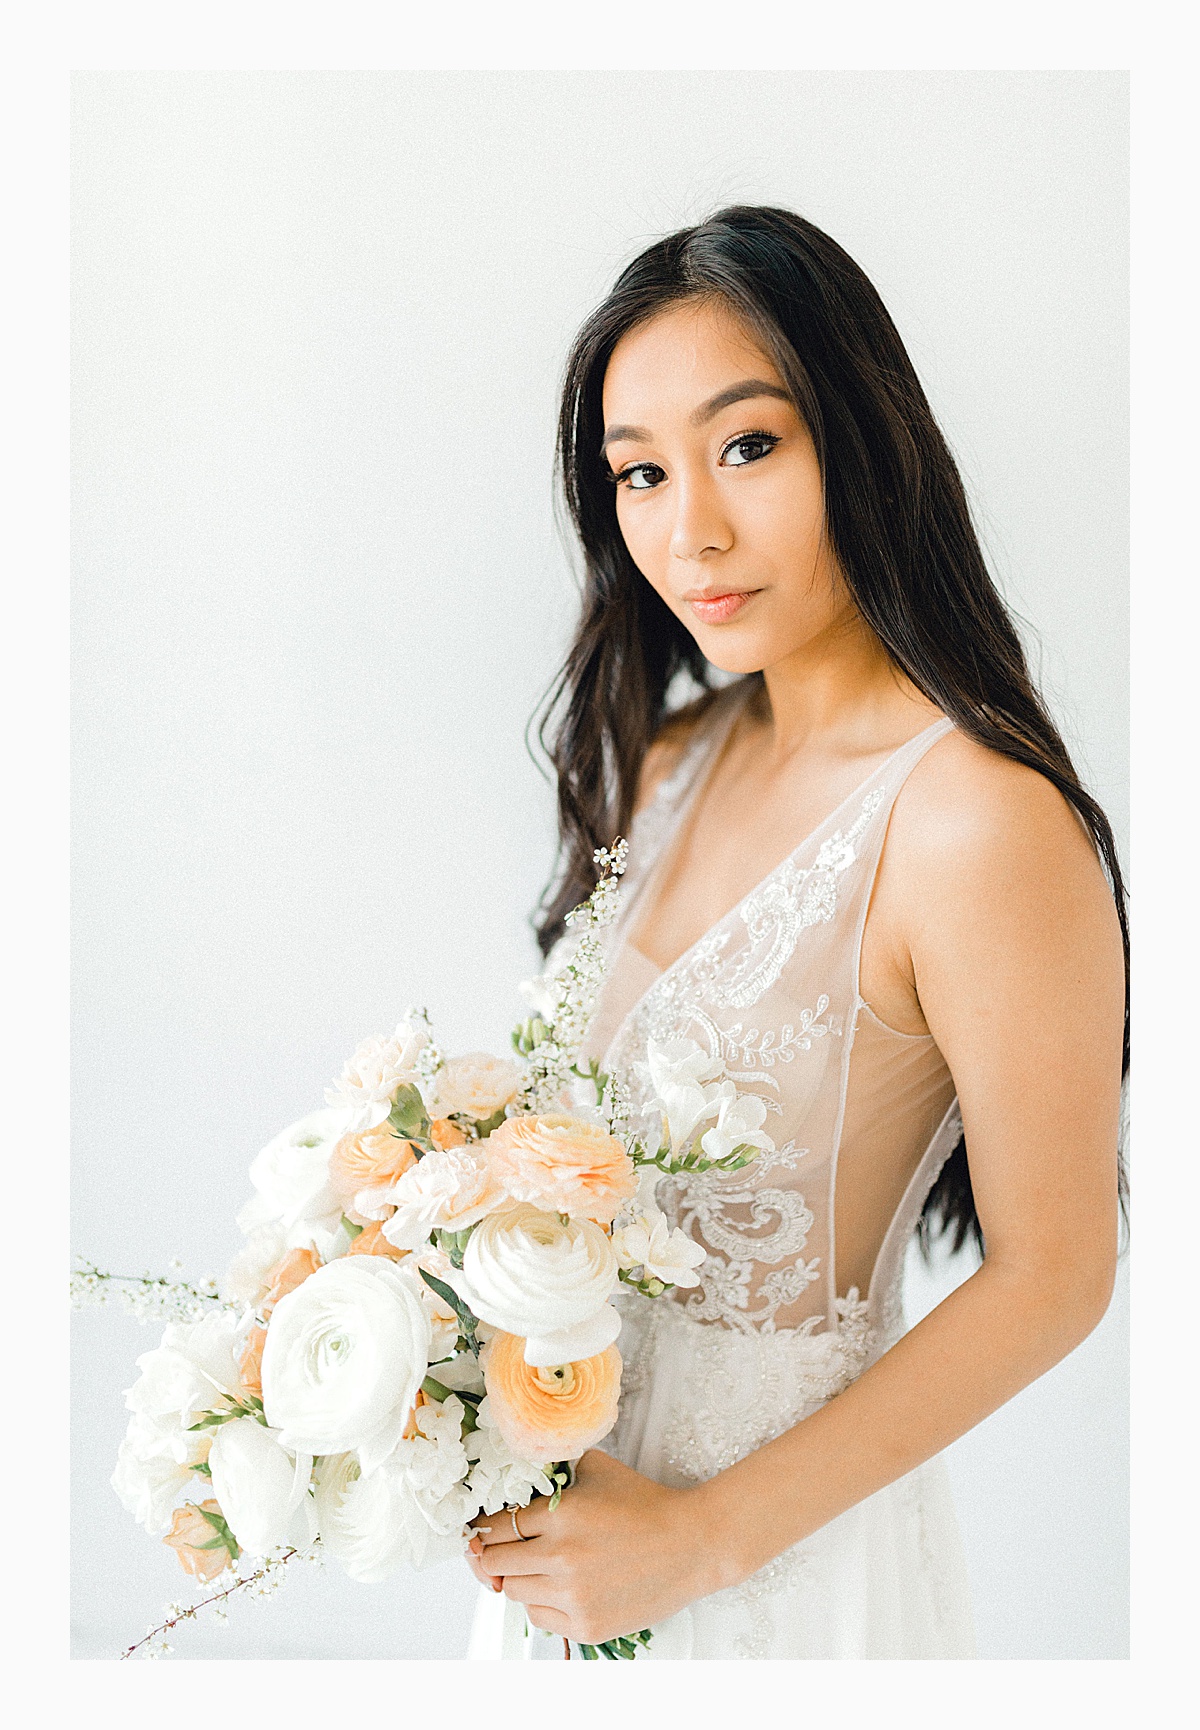 The Bemis Building in downtown Seattle is one of my favorite places to use for photo shoots!  This styled bridal shoot with touches of peach and white was dreamy.  #emmarosecompany #kindredpresets #seattlebride_0028.jpg